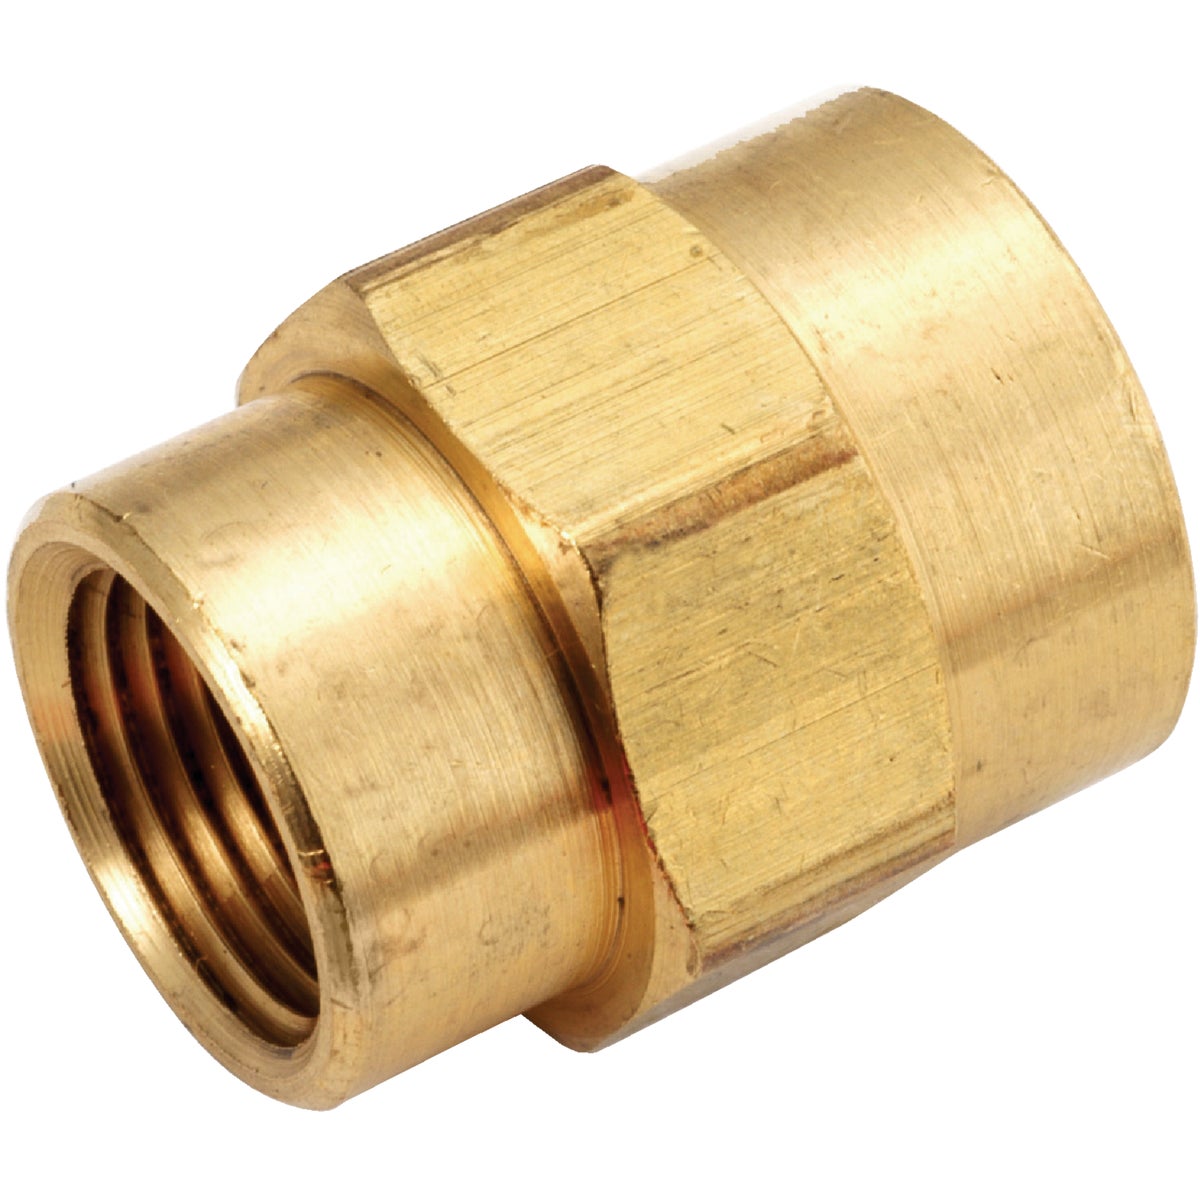 Anderson Metals 3/8 In. x 1/4 In. Yellow Brass Reducing Coupling